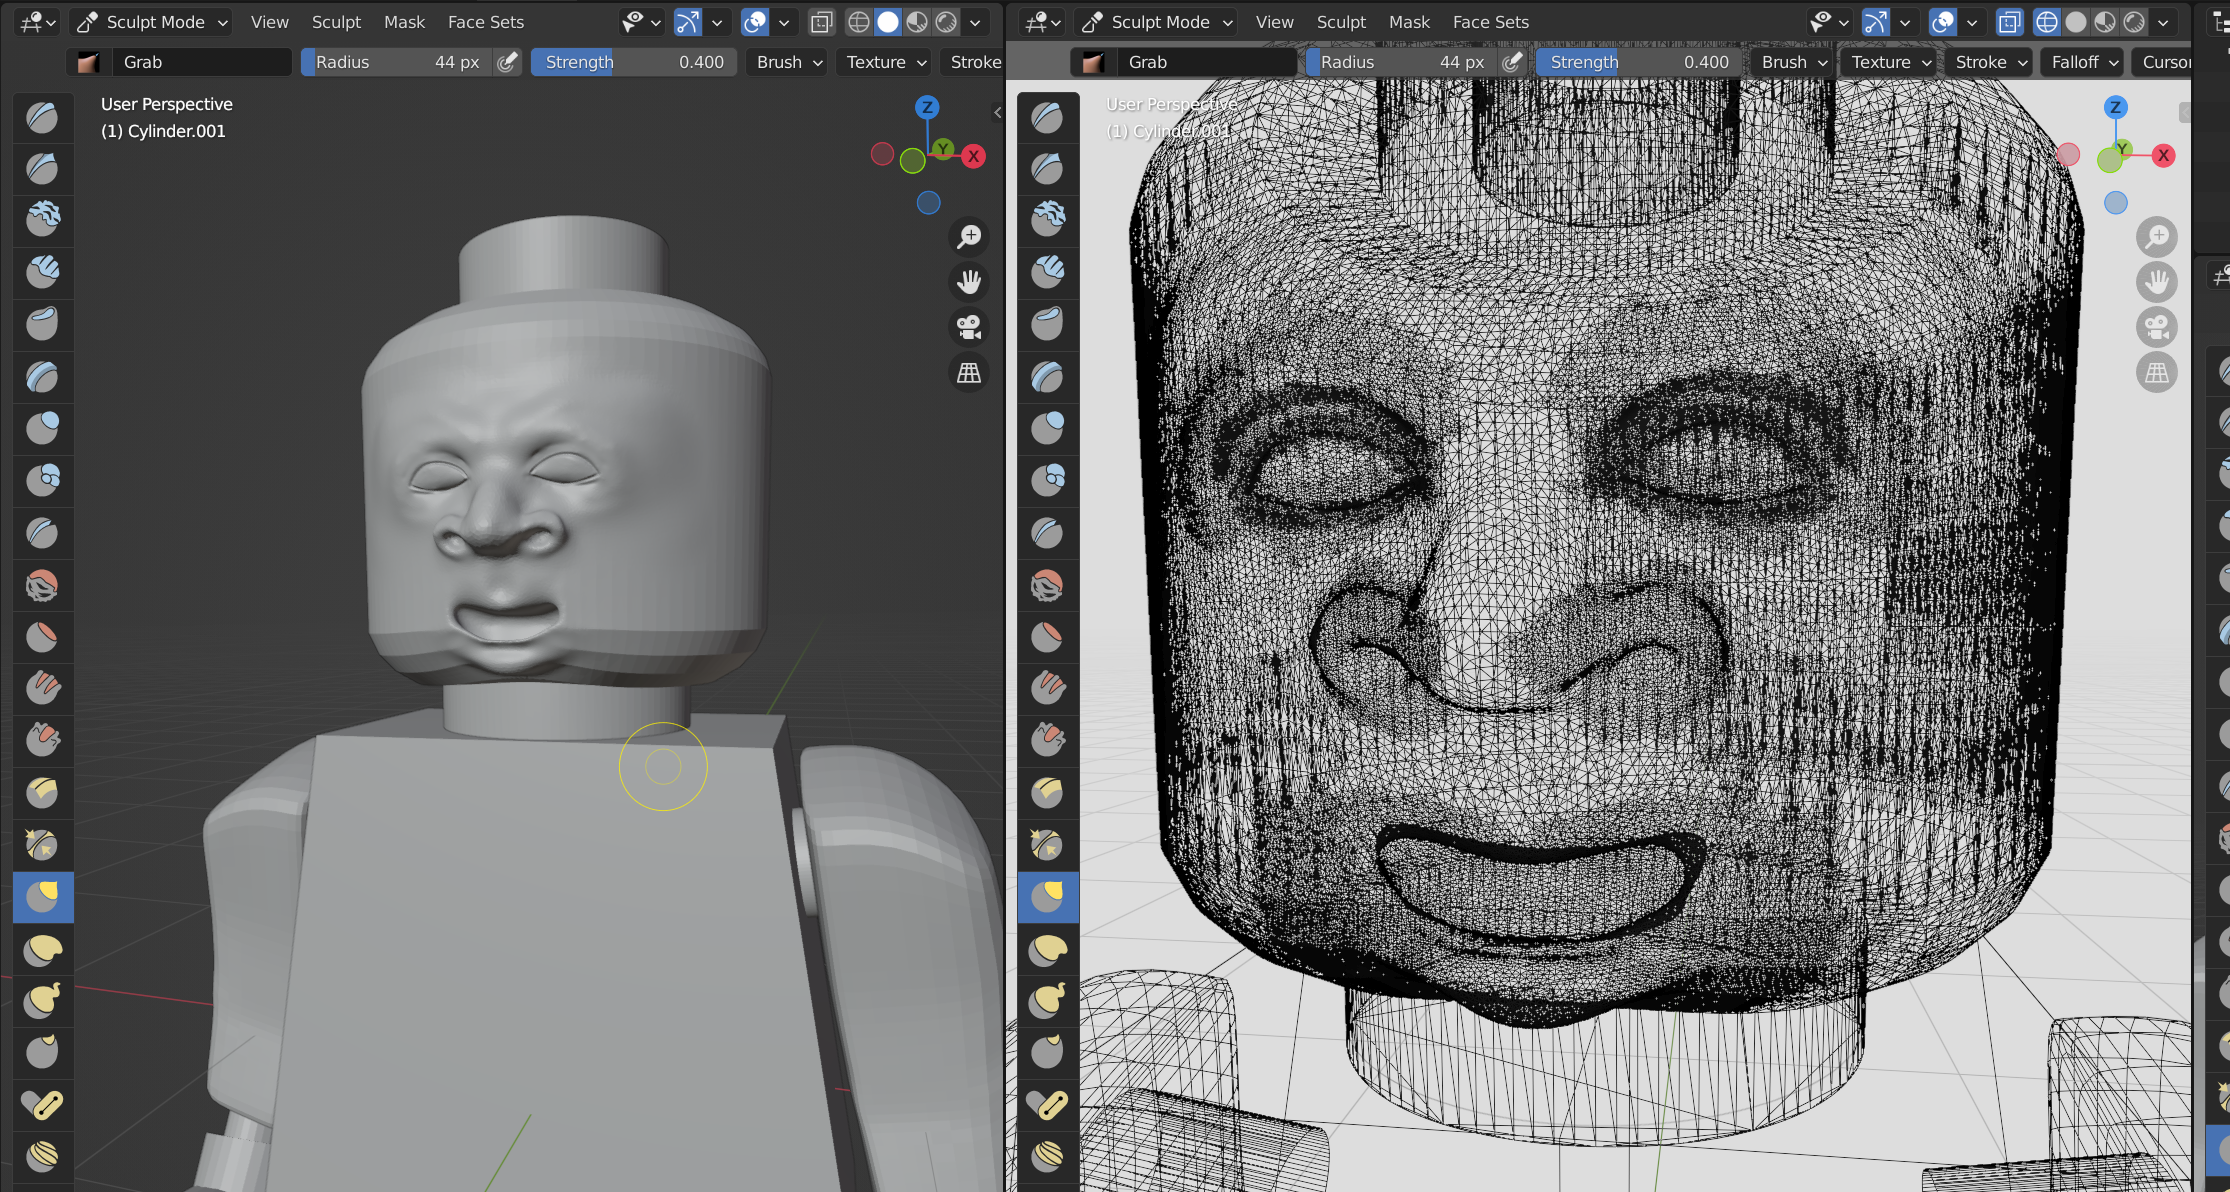 Giving our Lego man a high-poly makeover.